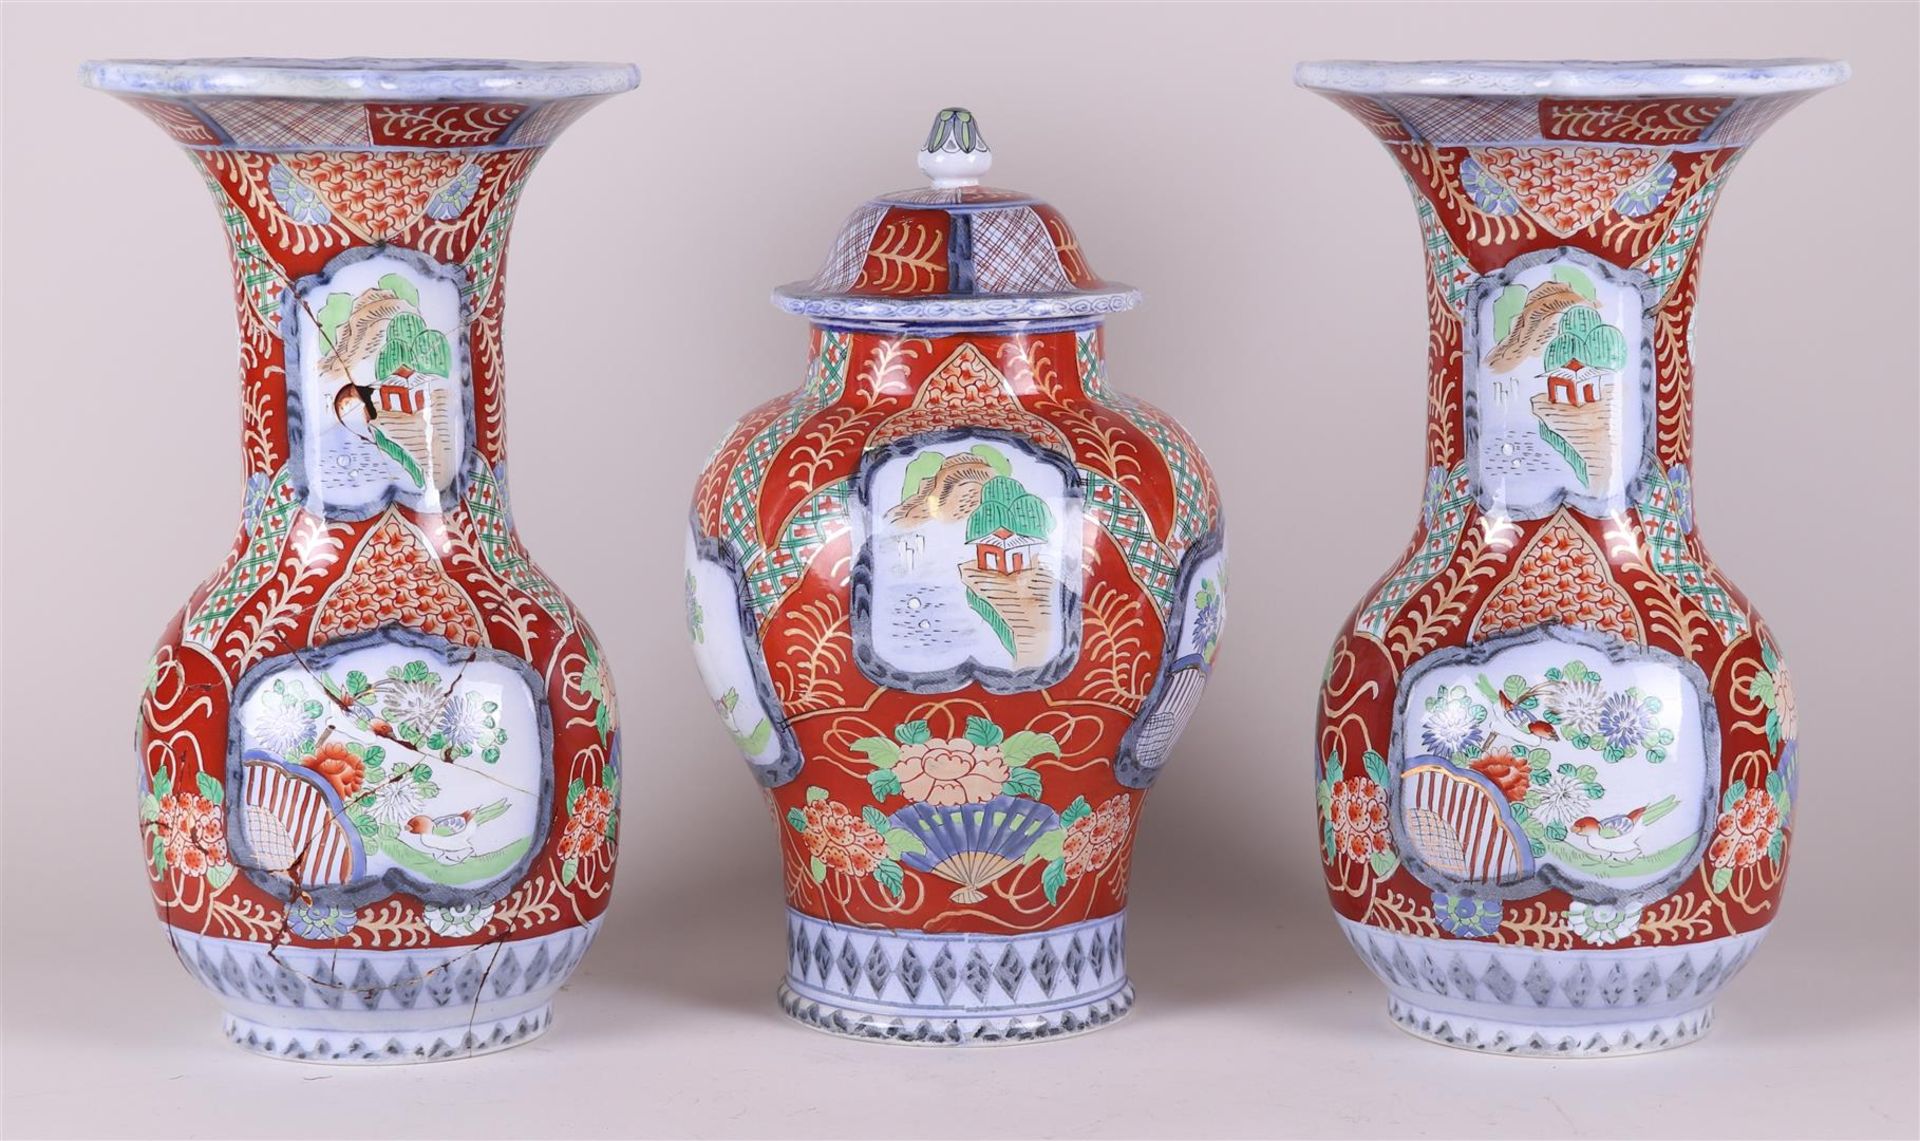 An earthenware Imari-style cabinet set, Petrus Regout, Maastricht. - Image 2 of 2